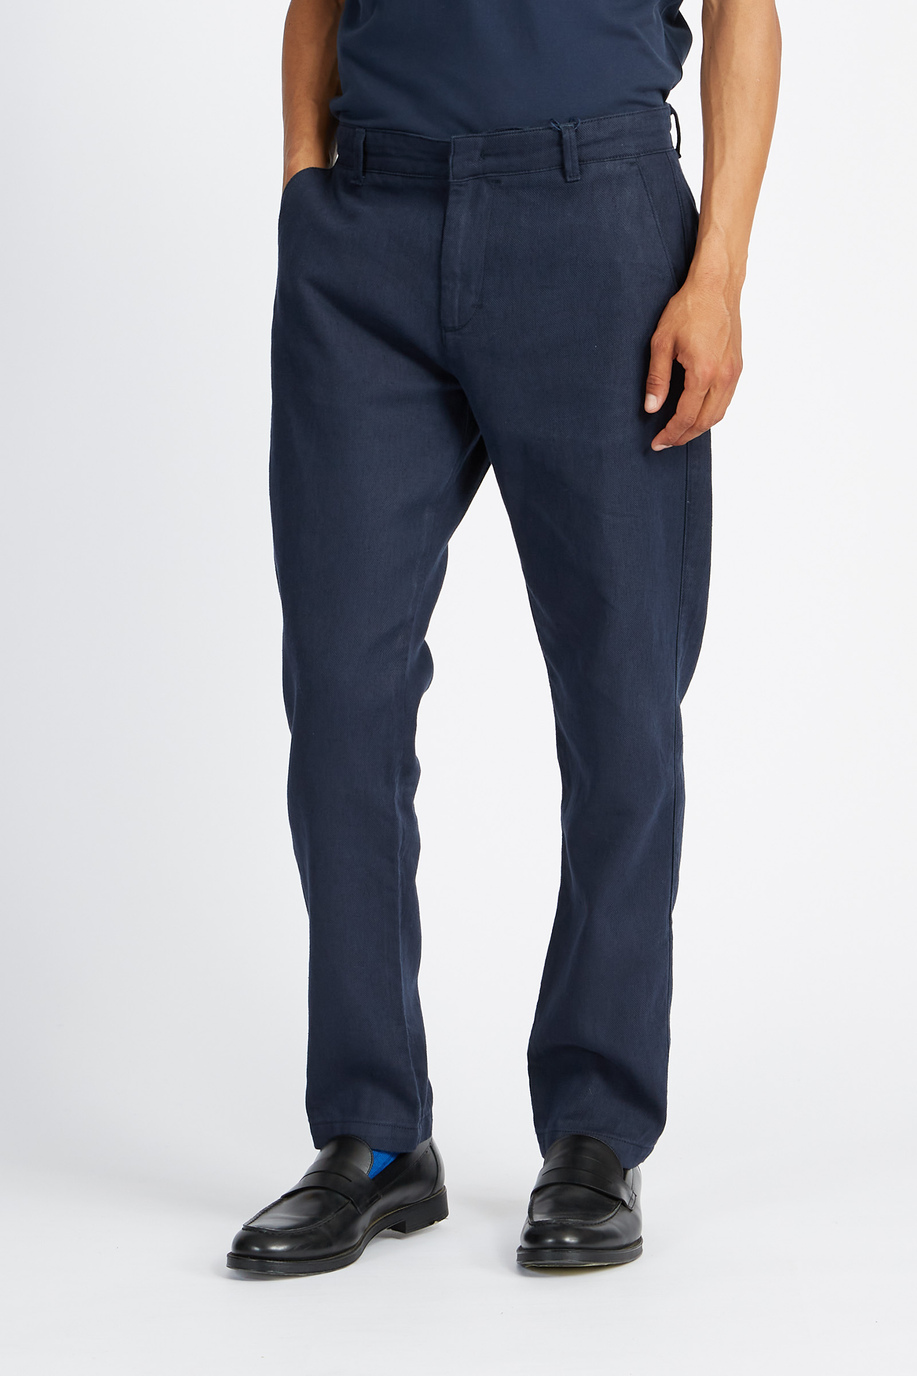 Straight cut men's chino trousers in plain color Logos - Vickan - Trousers | La Martina - Official Online Shop